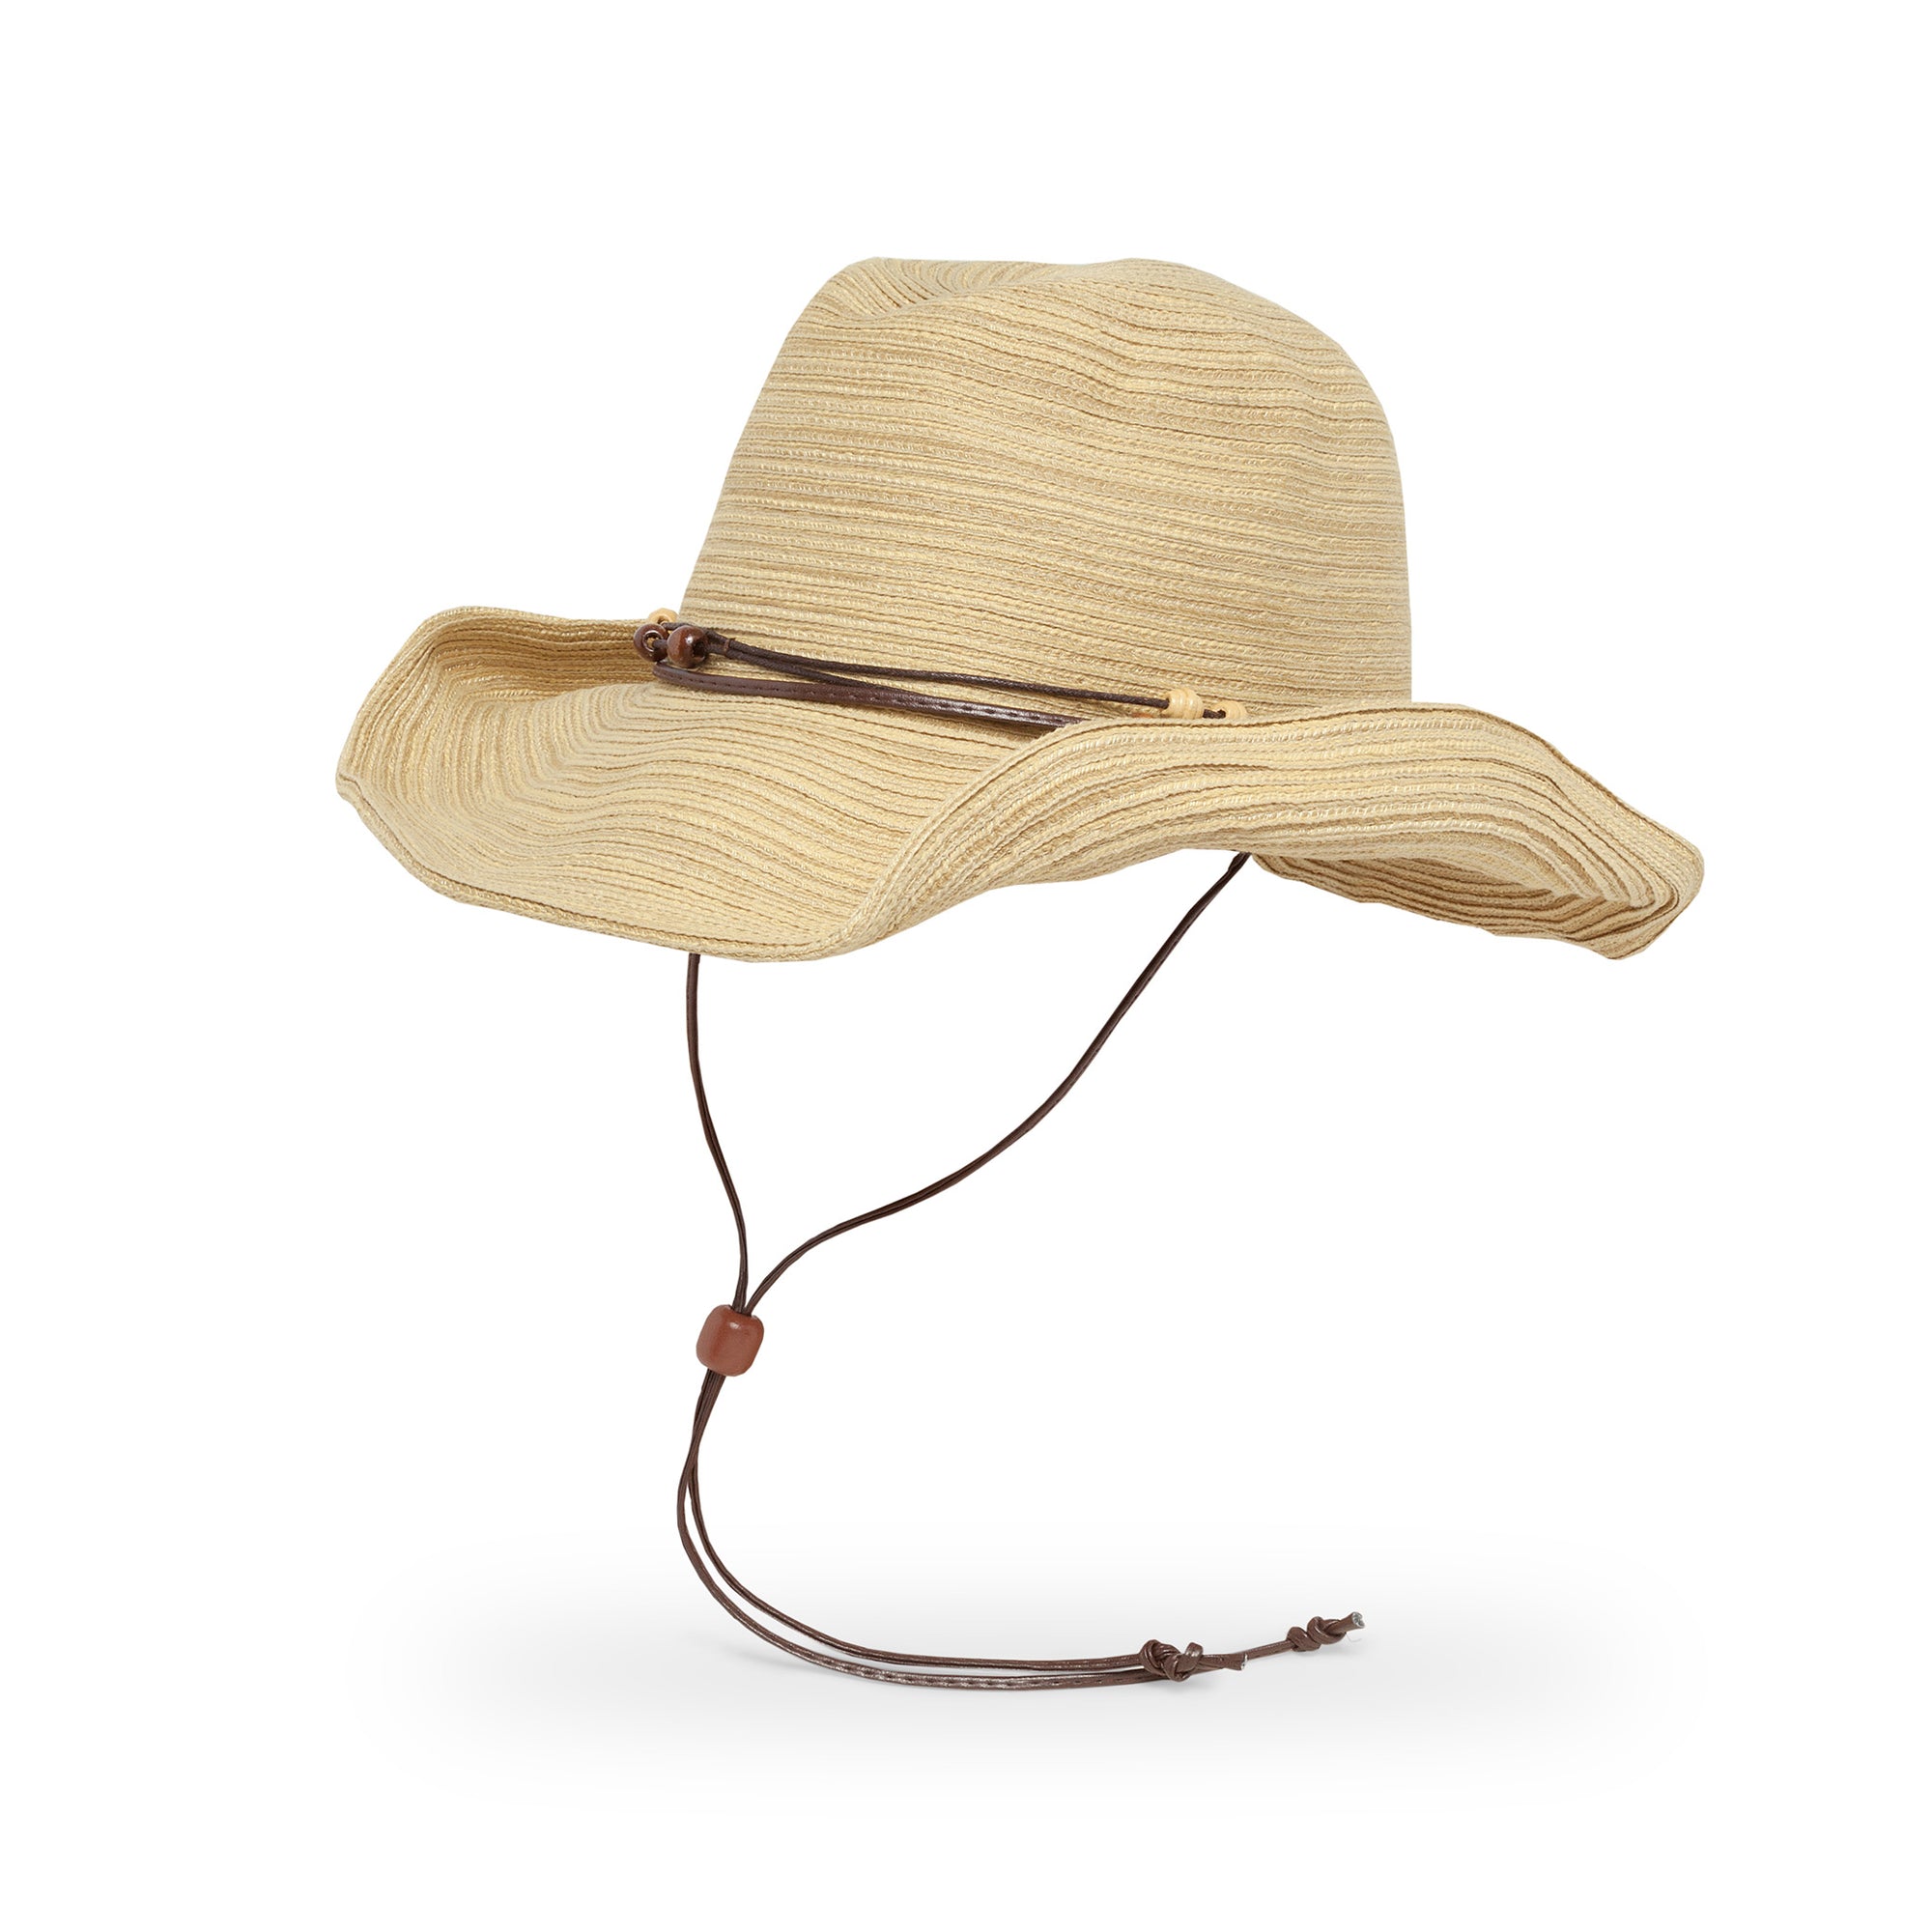 The women's sunset hat in oatmeal